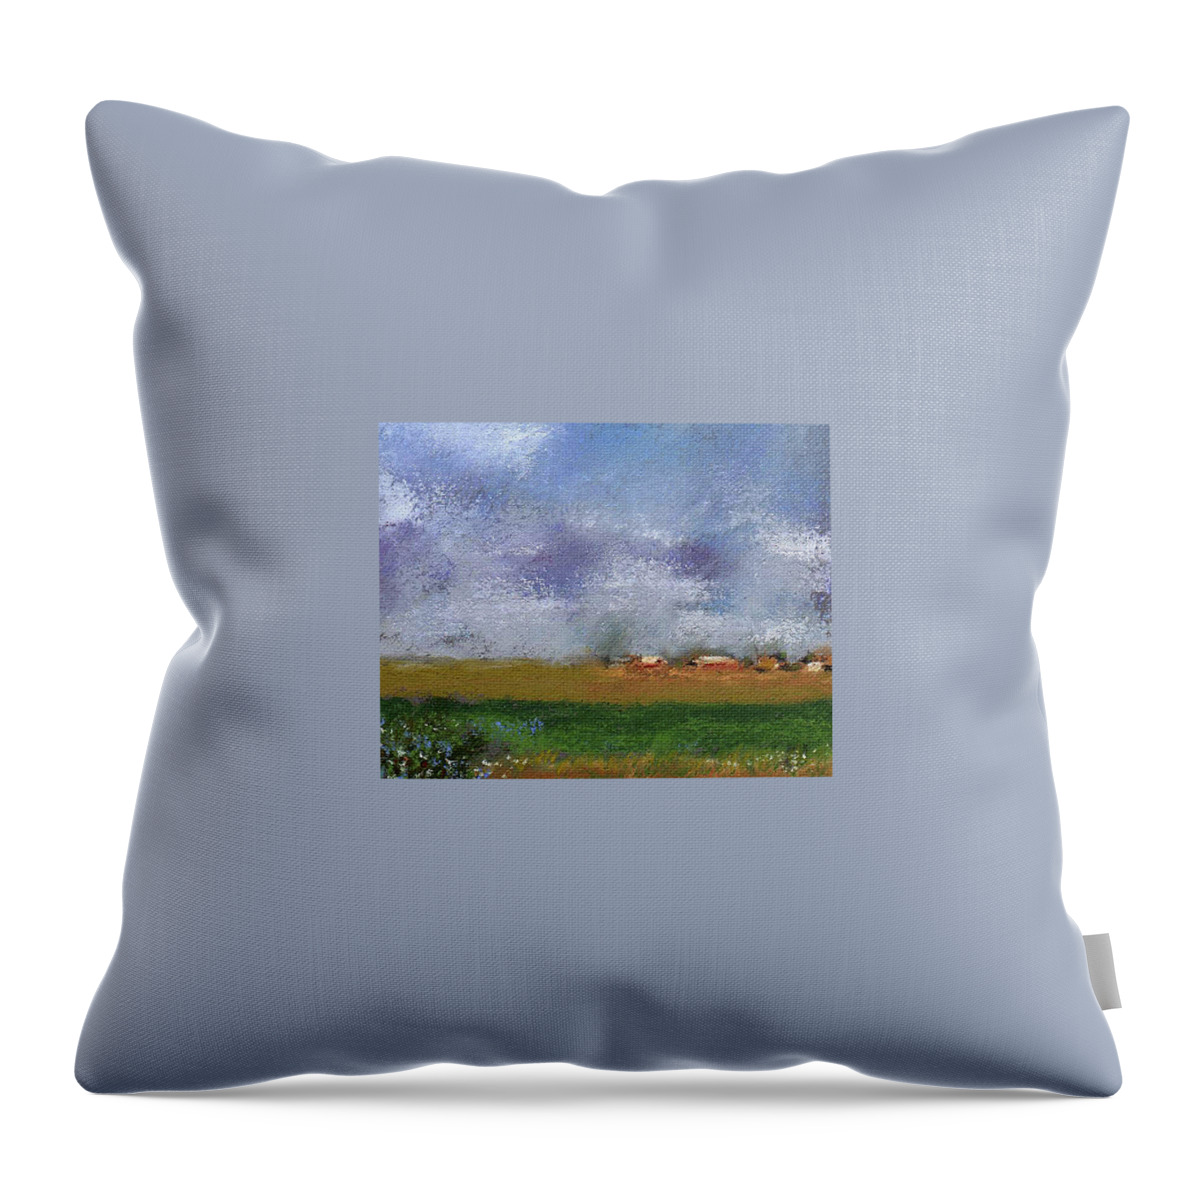 Miniature Throw Pillow featuring the painting Countryside by David Patterson